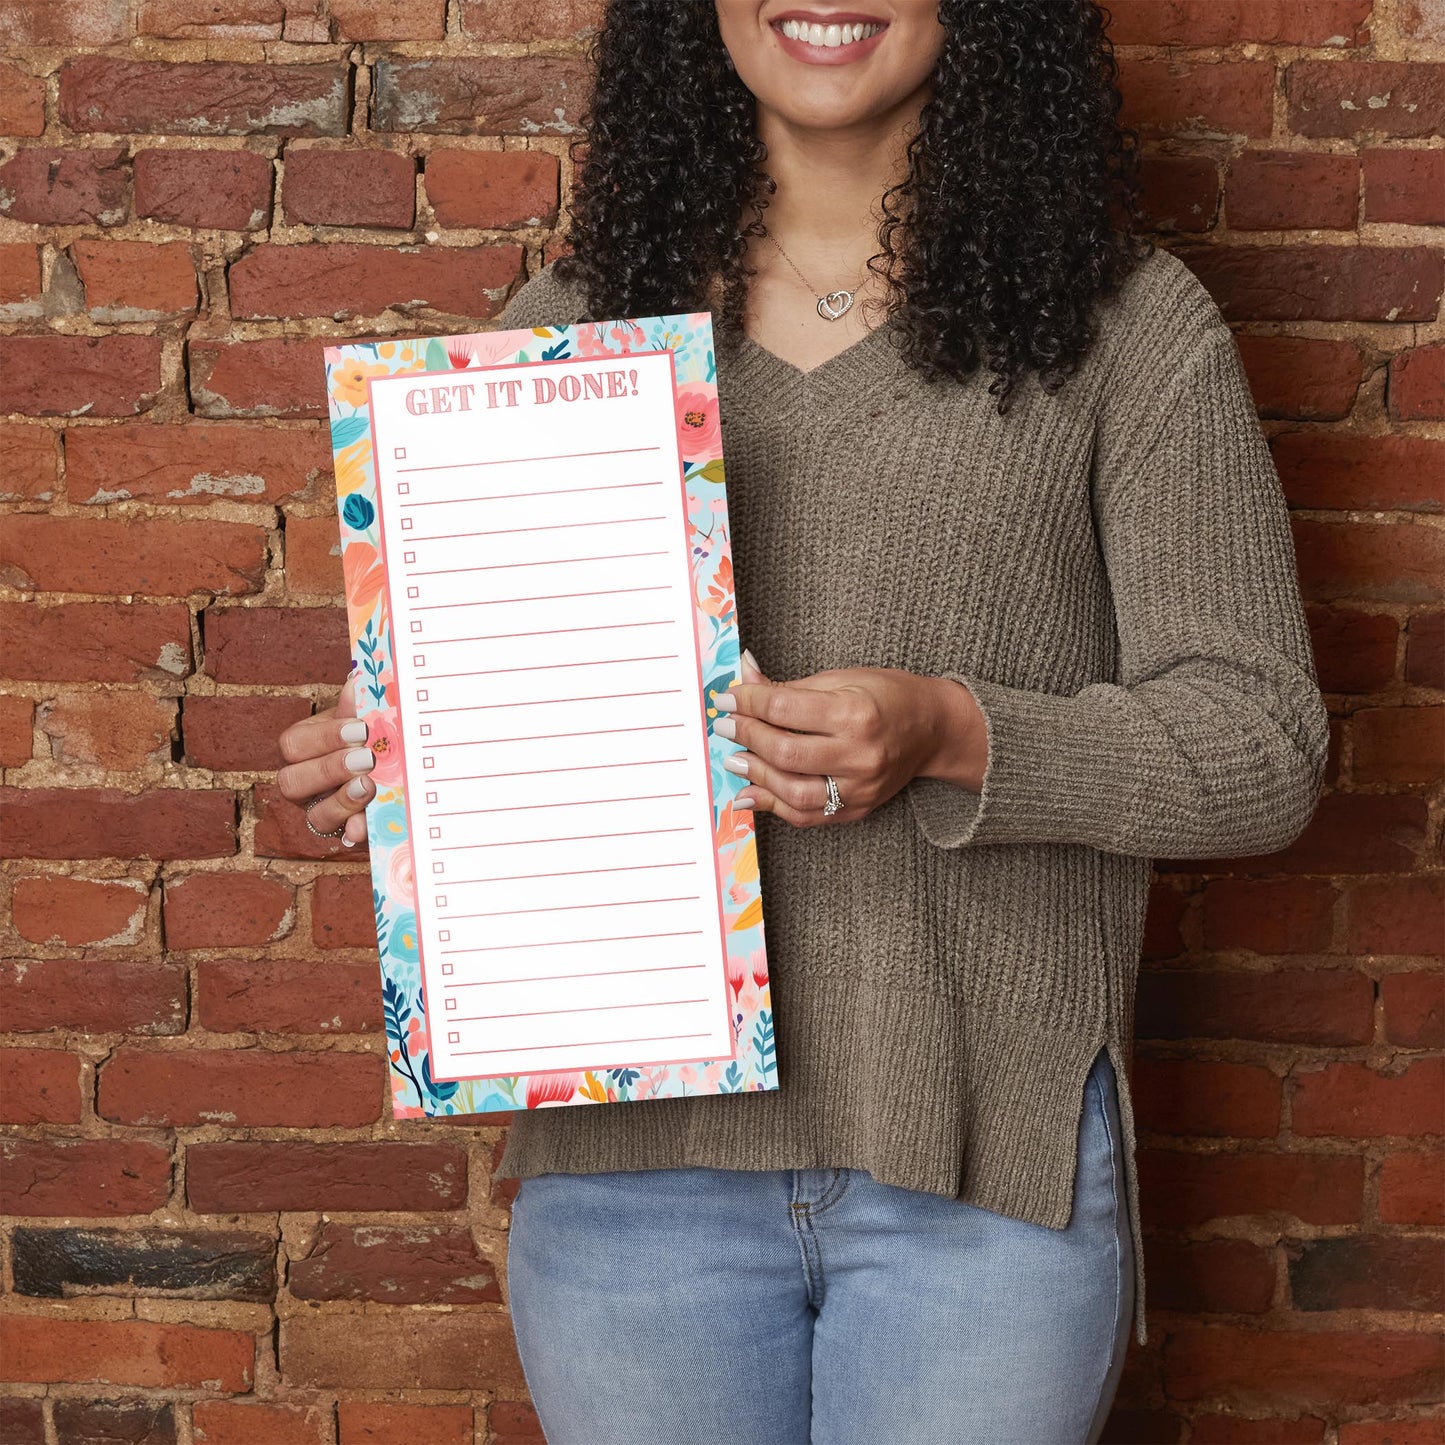 Spring Tracker Floral To Do List Get It Done! | 8x16